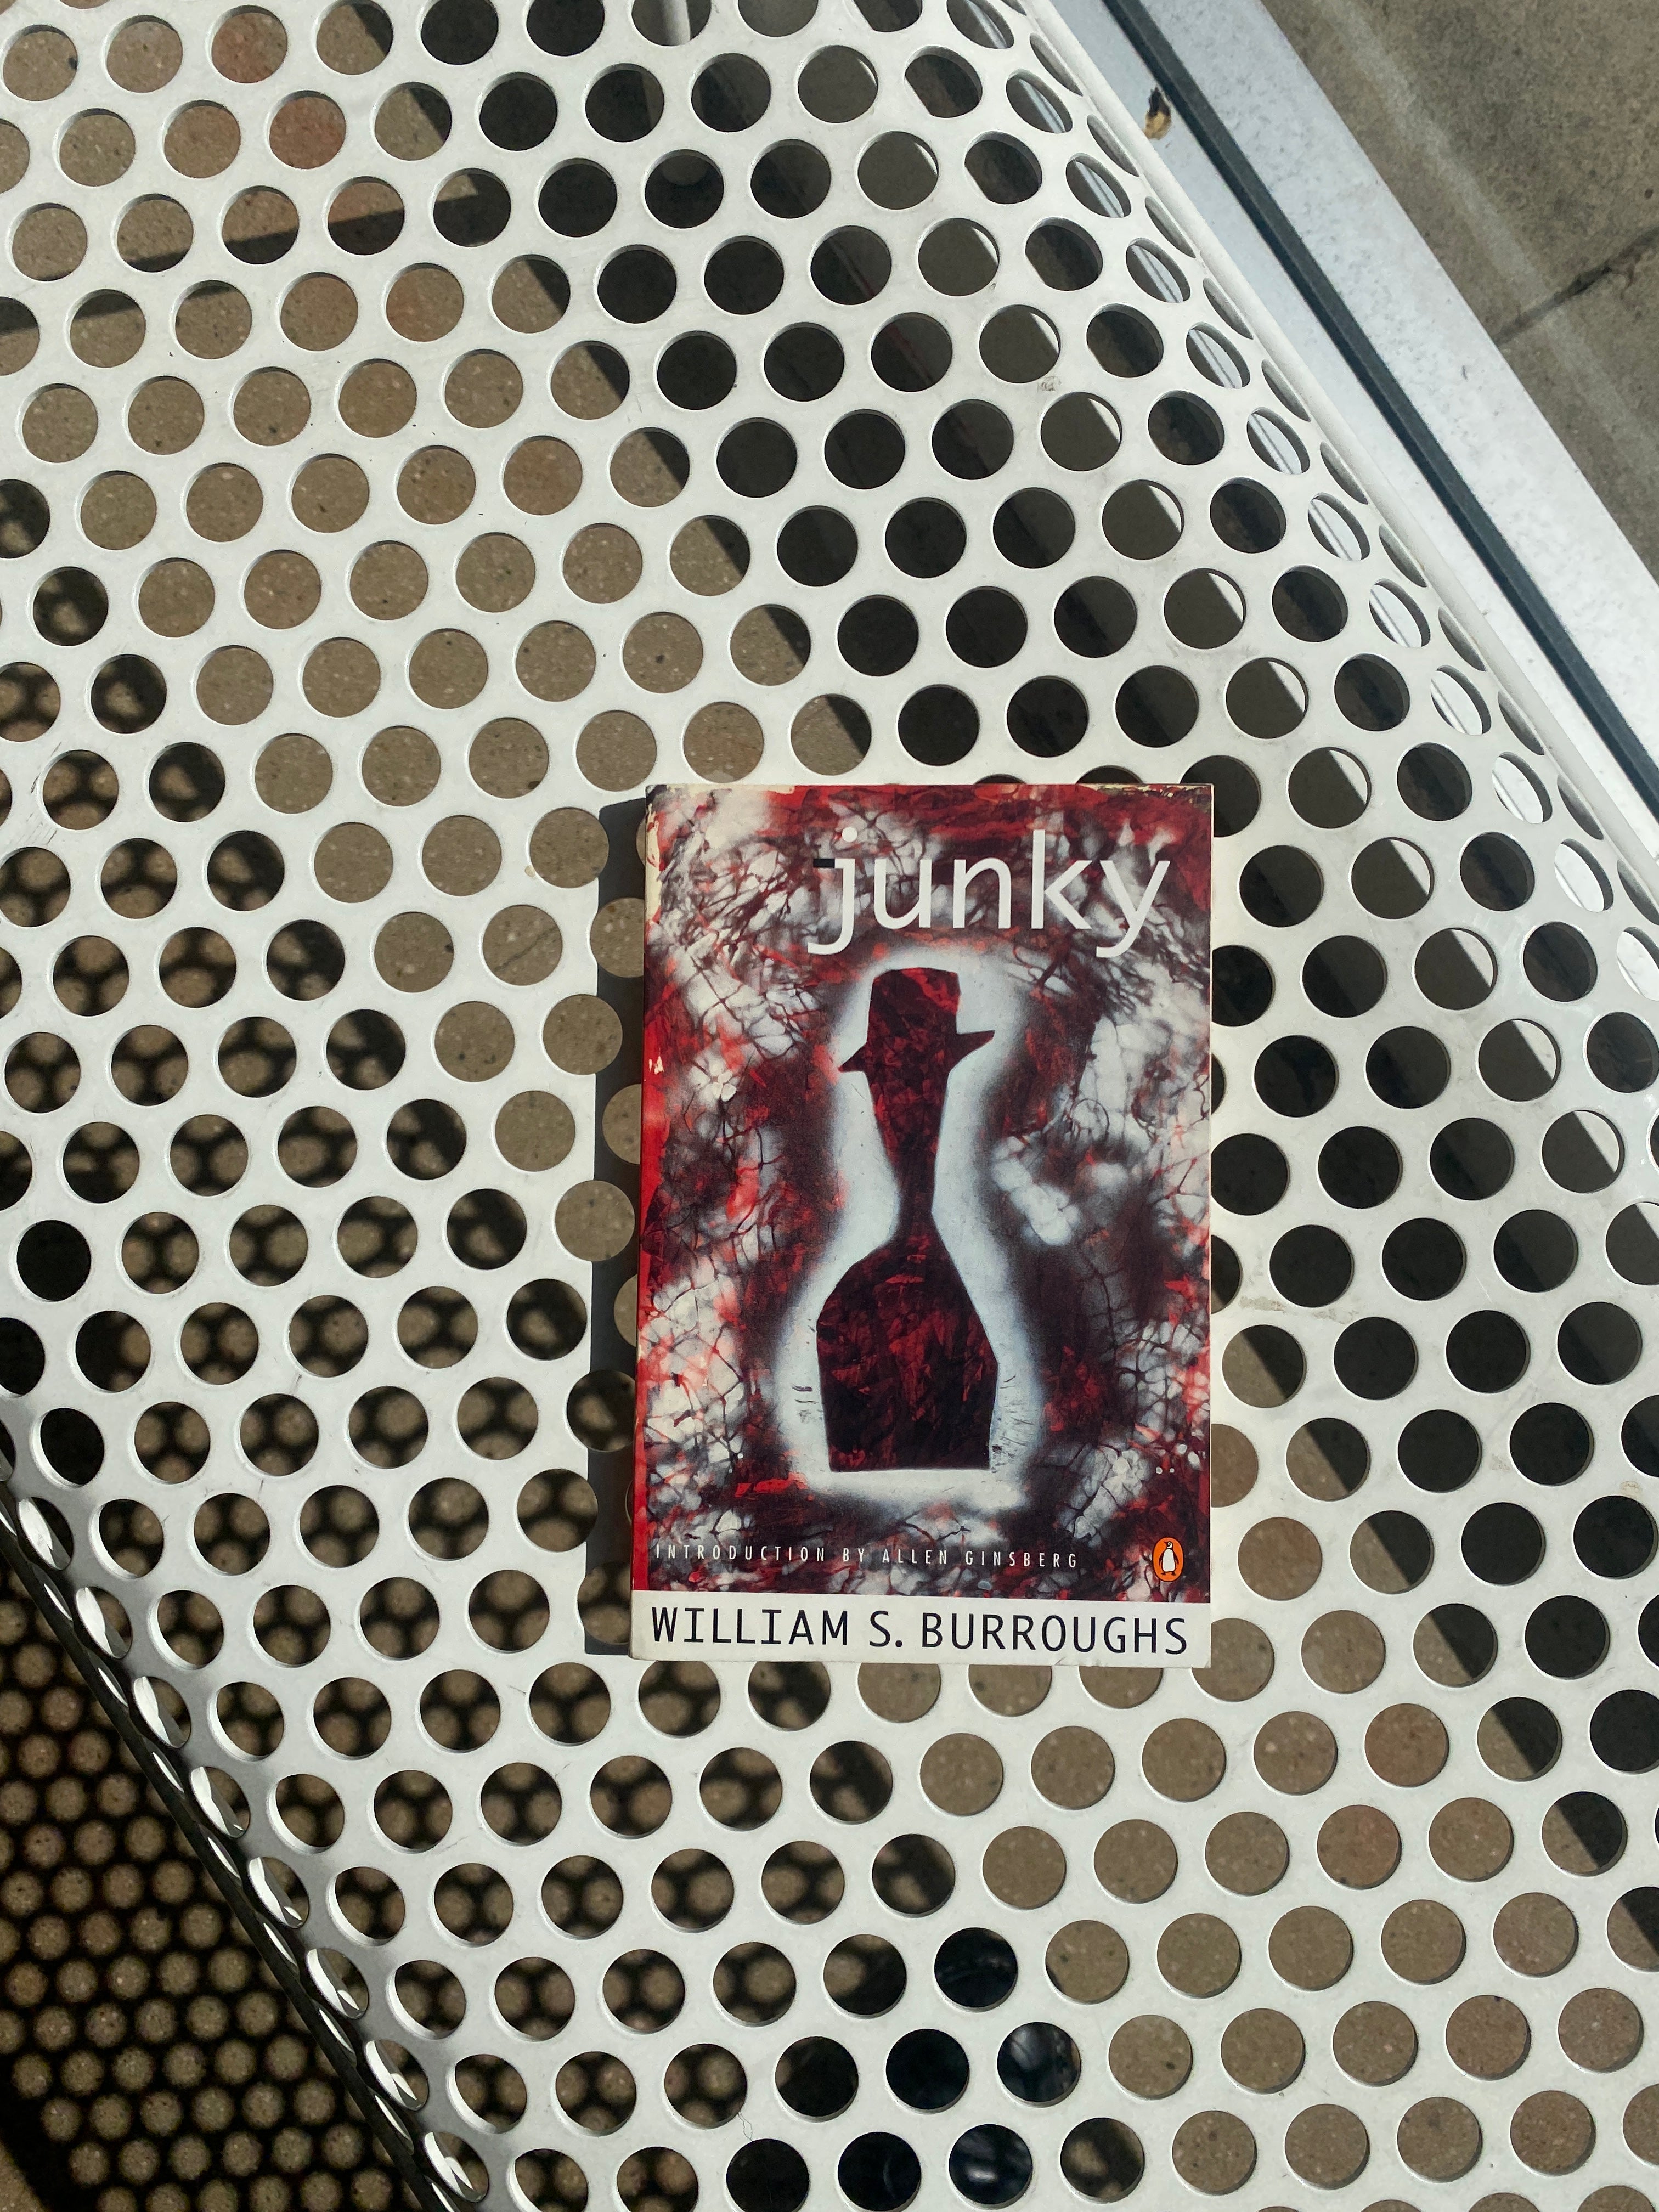 Junky by William S. Burroughs (Penguin Trade)